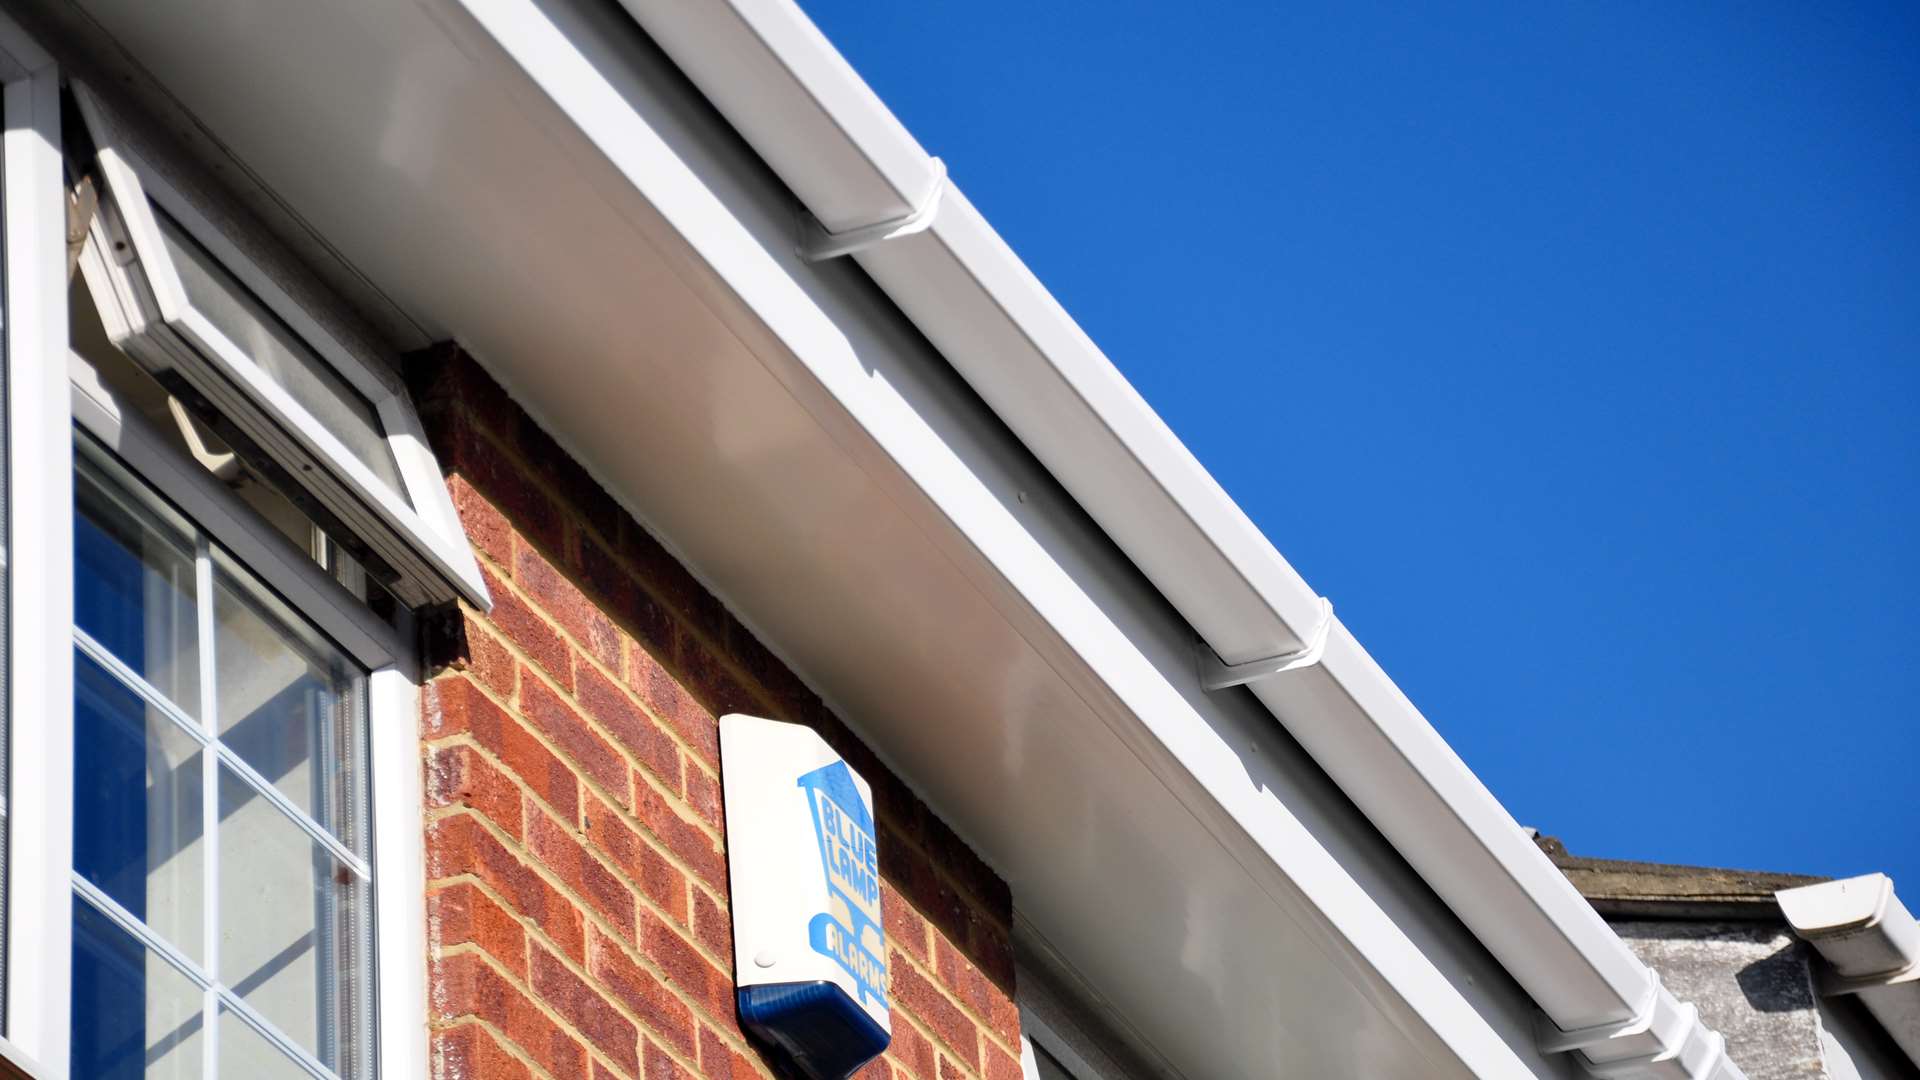 Now is the time to clean your gutters